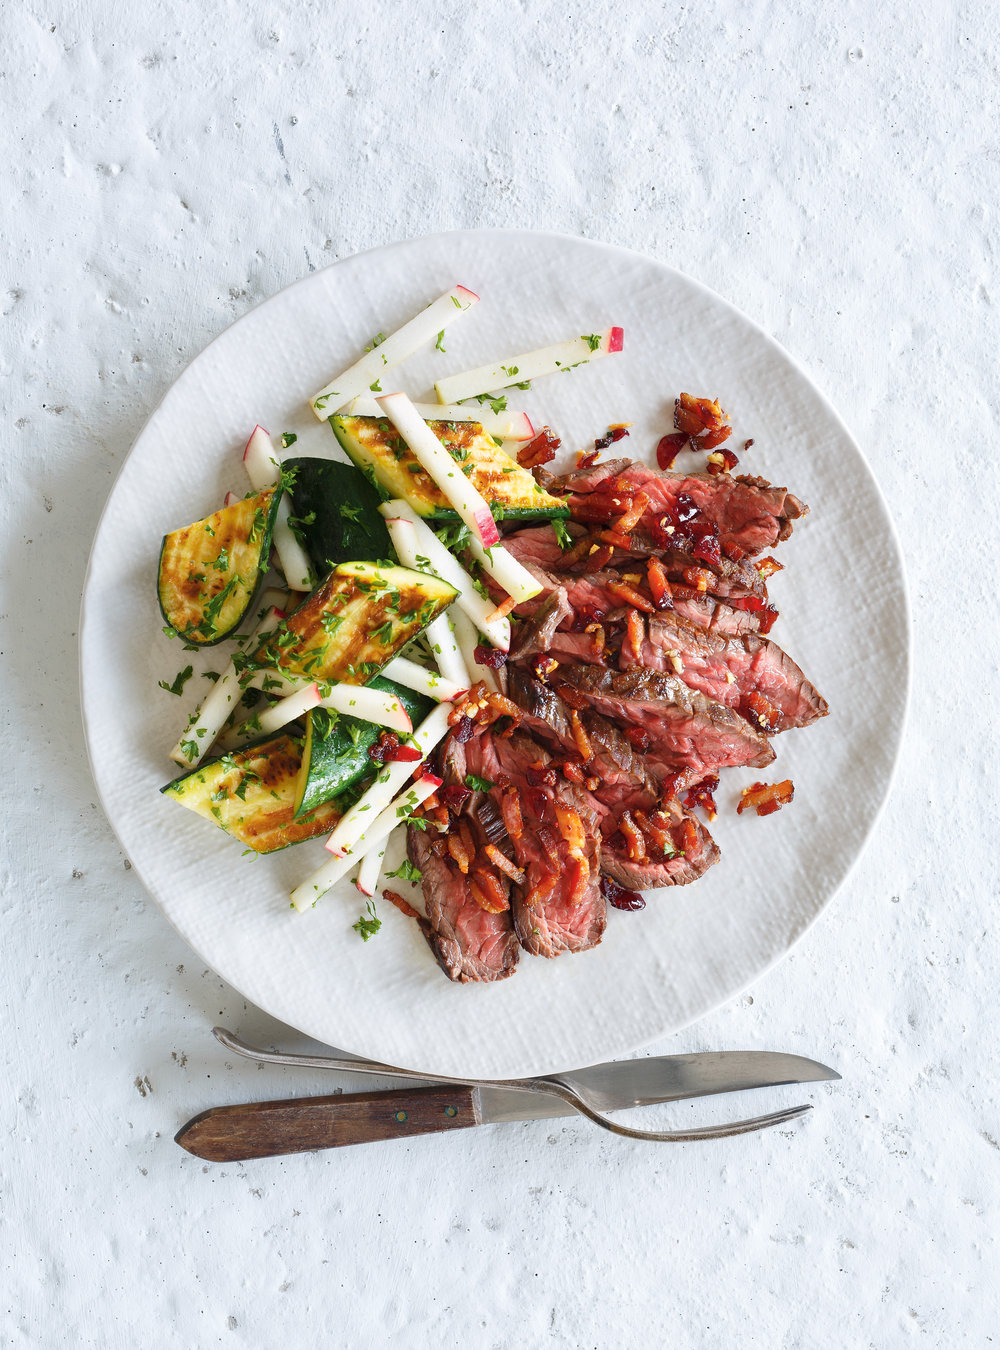 Grilled Beef with Cranberries and Roasted Zucchini